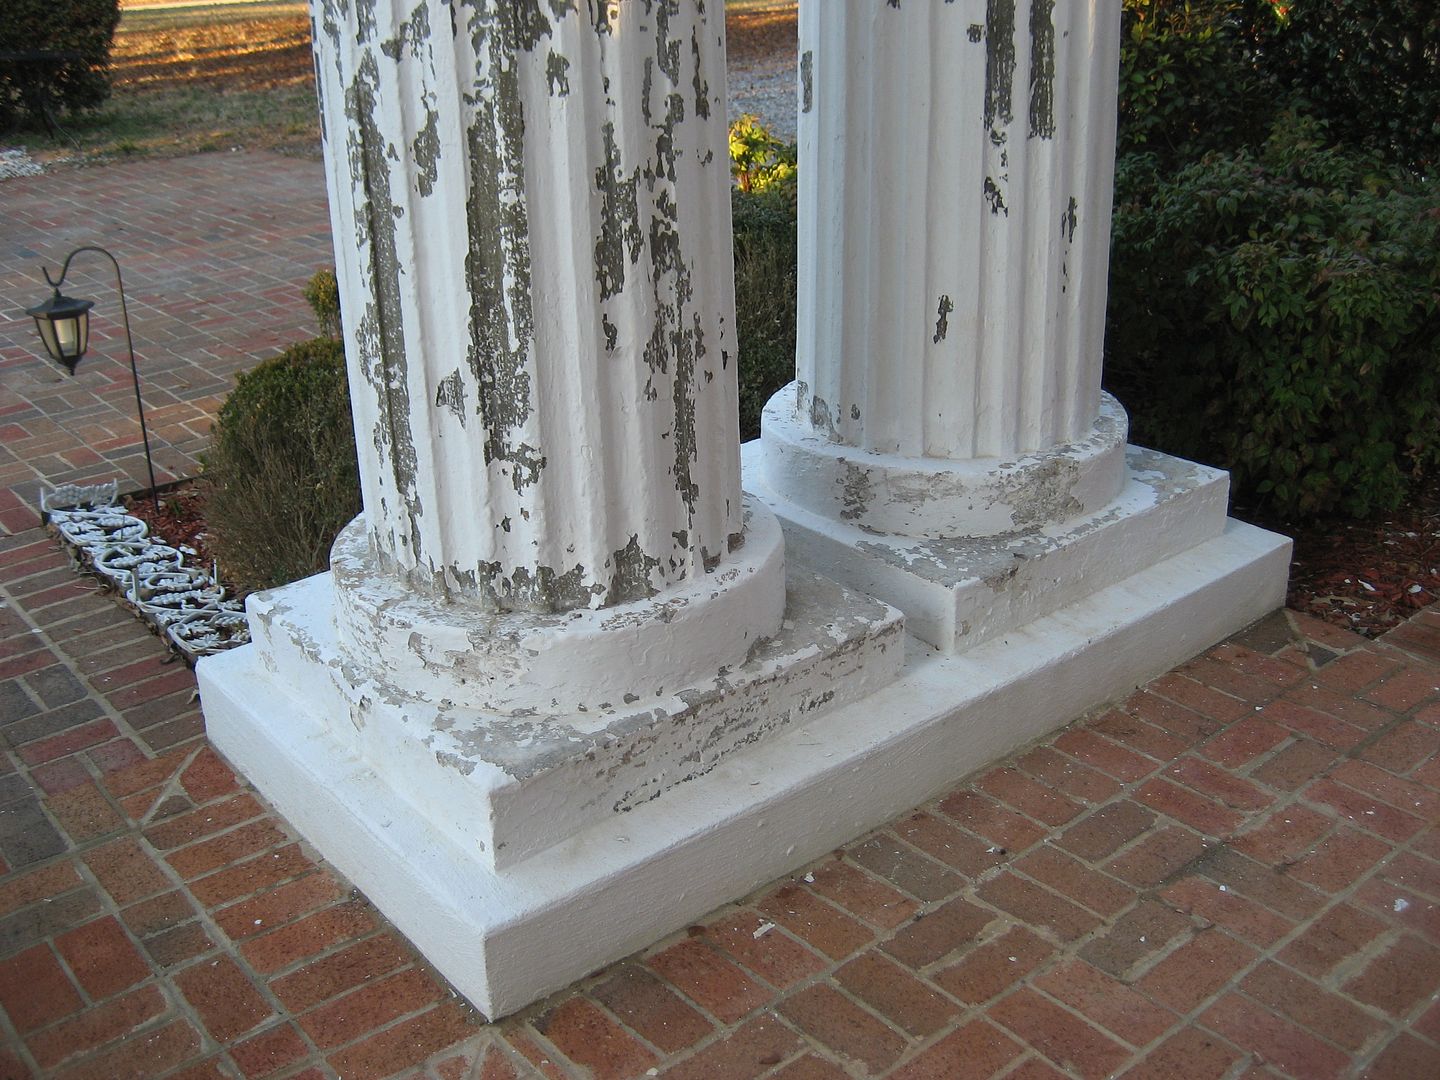 One of the first thigns that caught my eye were these columns. Theyre concrete. The Sears Magnolia had hollow wooden columns (poplar). No kit house is going to come with concrete two-story Corinthian columns. The weight would be enormous. When I saw these columns I knew - this was not a kit home from Sears. 